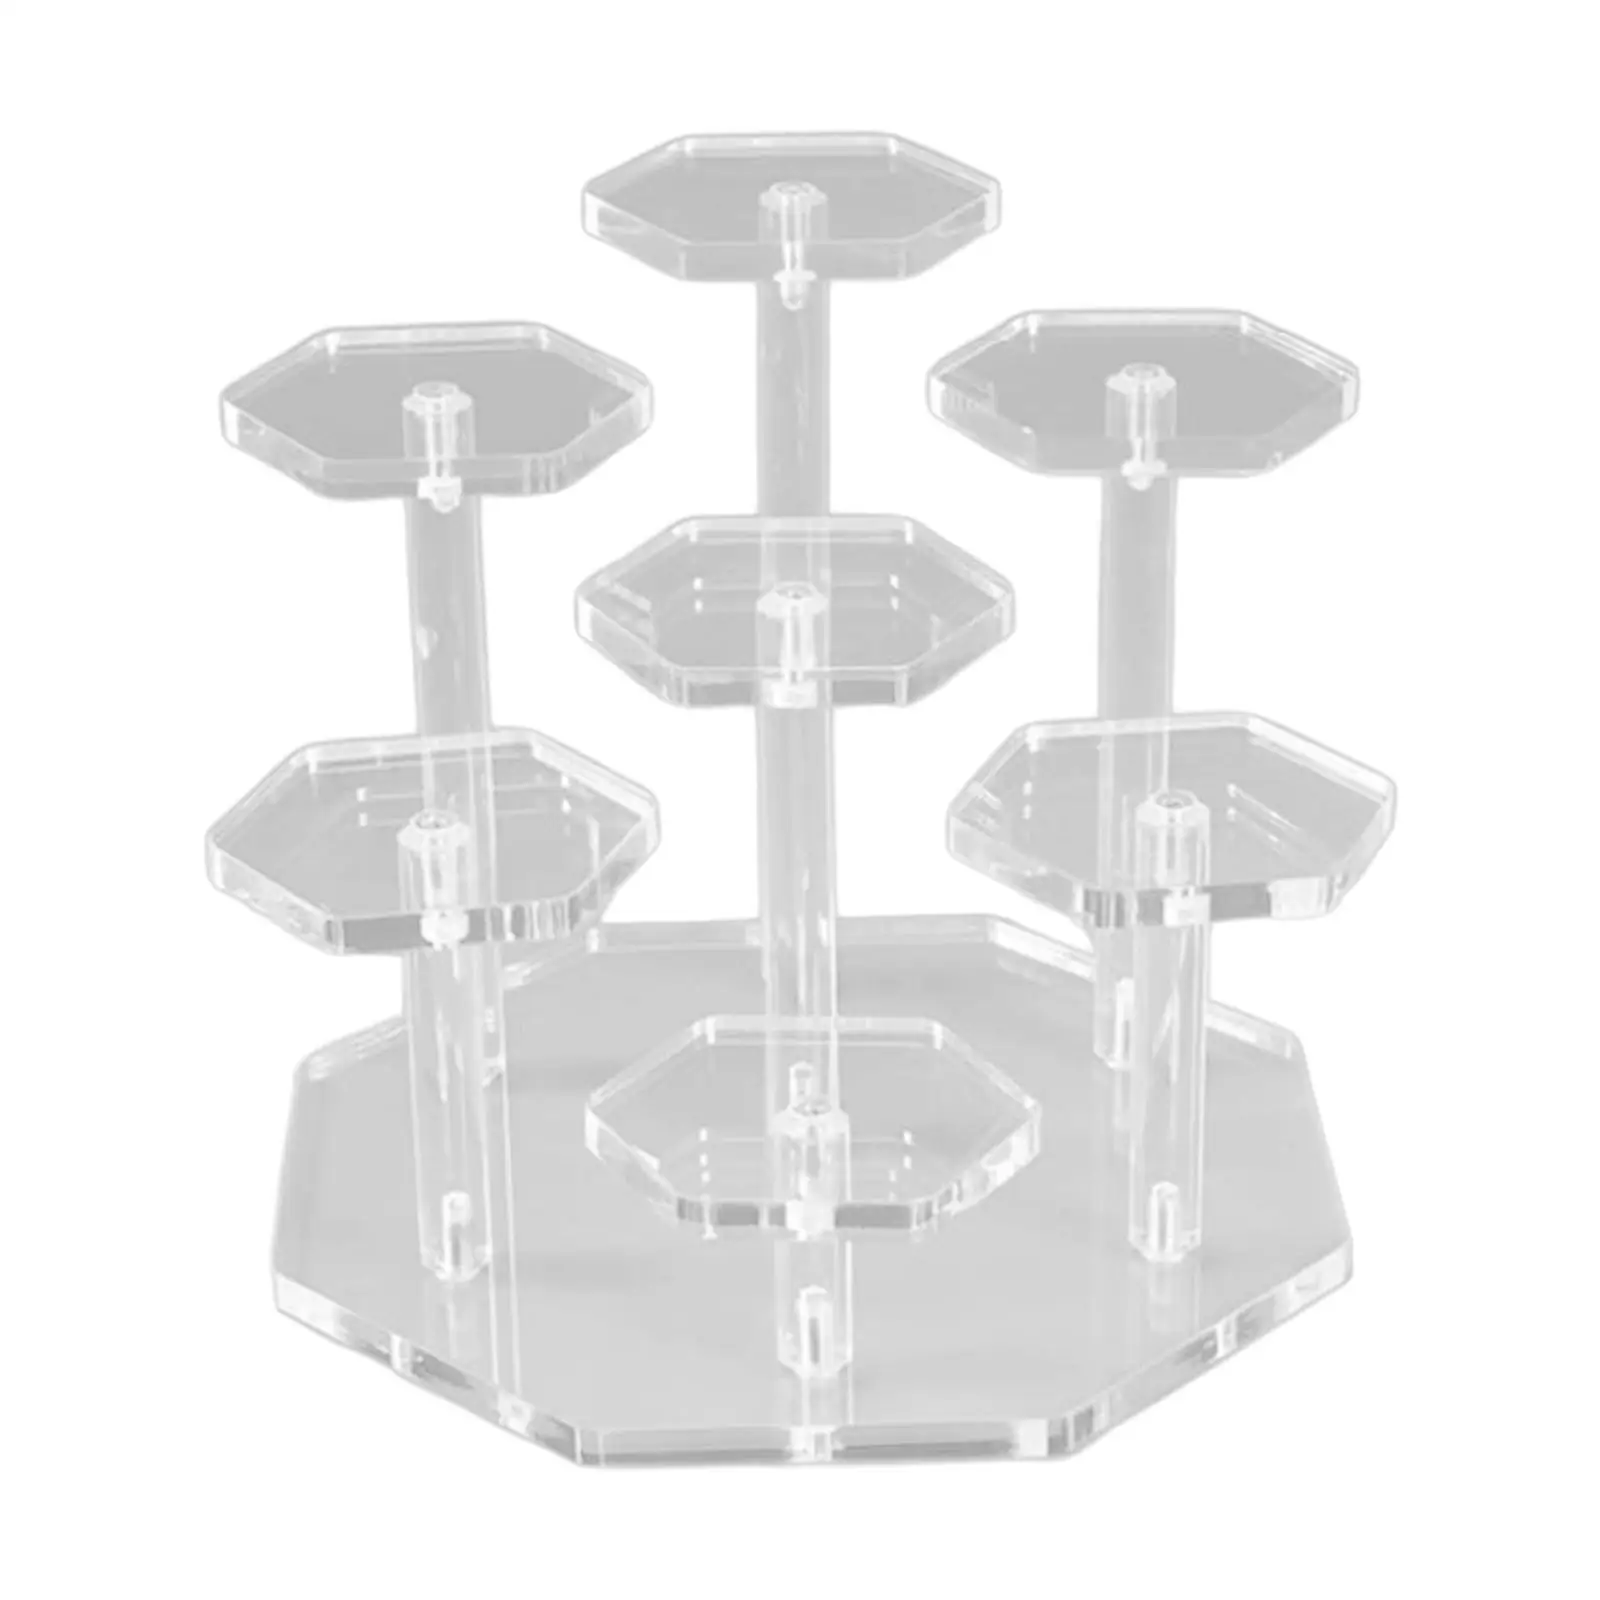 Display Stand Display Risers Collectibles Display Stand Acrylic Risers Organizer Holder for Toys Dessert Desktop Dolls